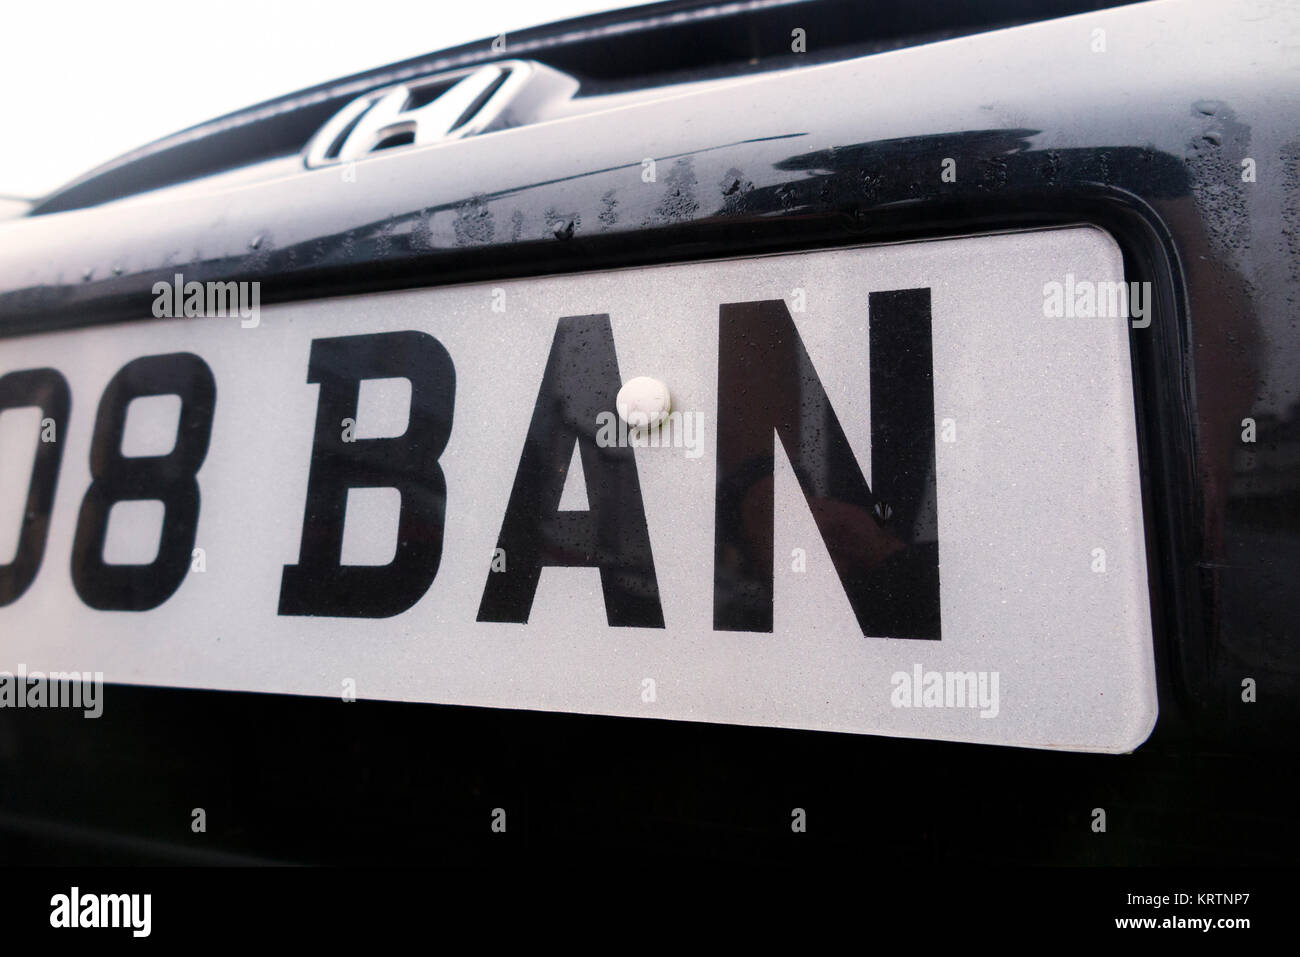 Vehicle registration car number plate with letters that spell the word BAN . UK. Could be used to illustrate news on banned driver or banning drivers Stock Photo